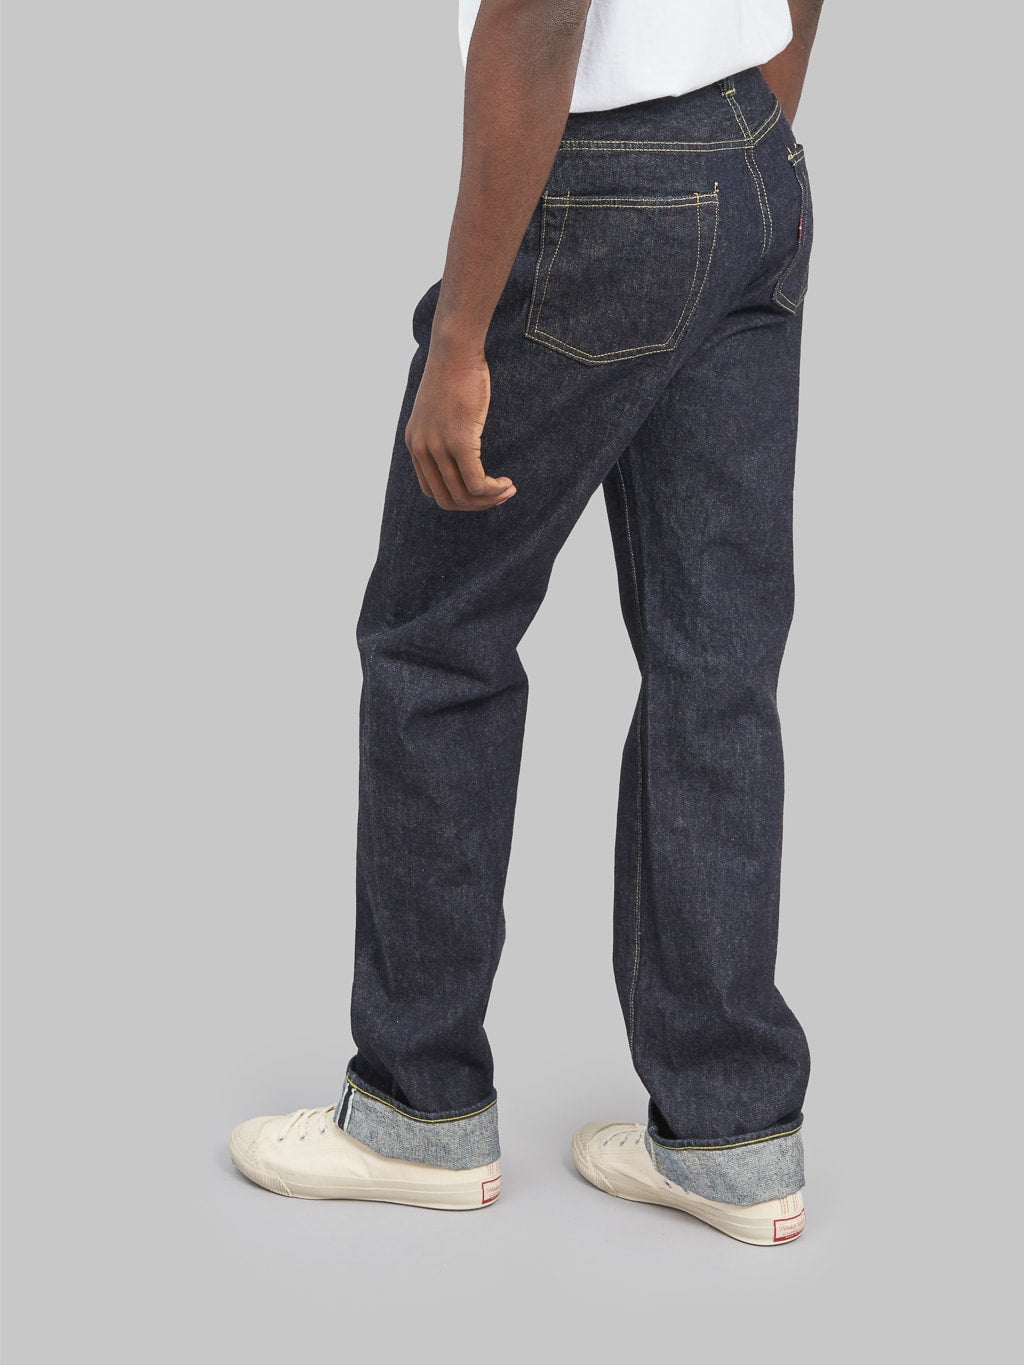 tcb s40s regular straight jeans rise fit